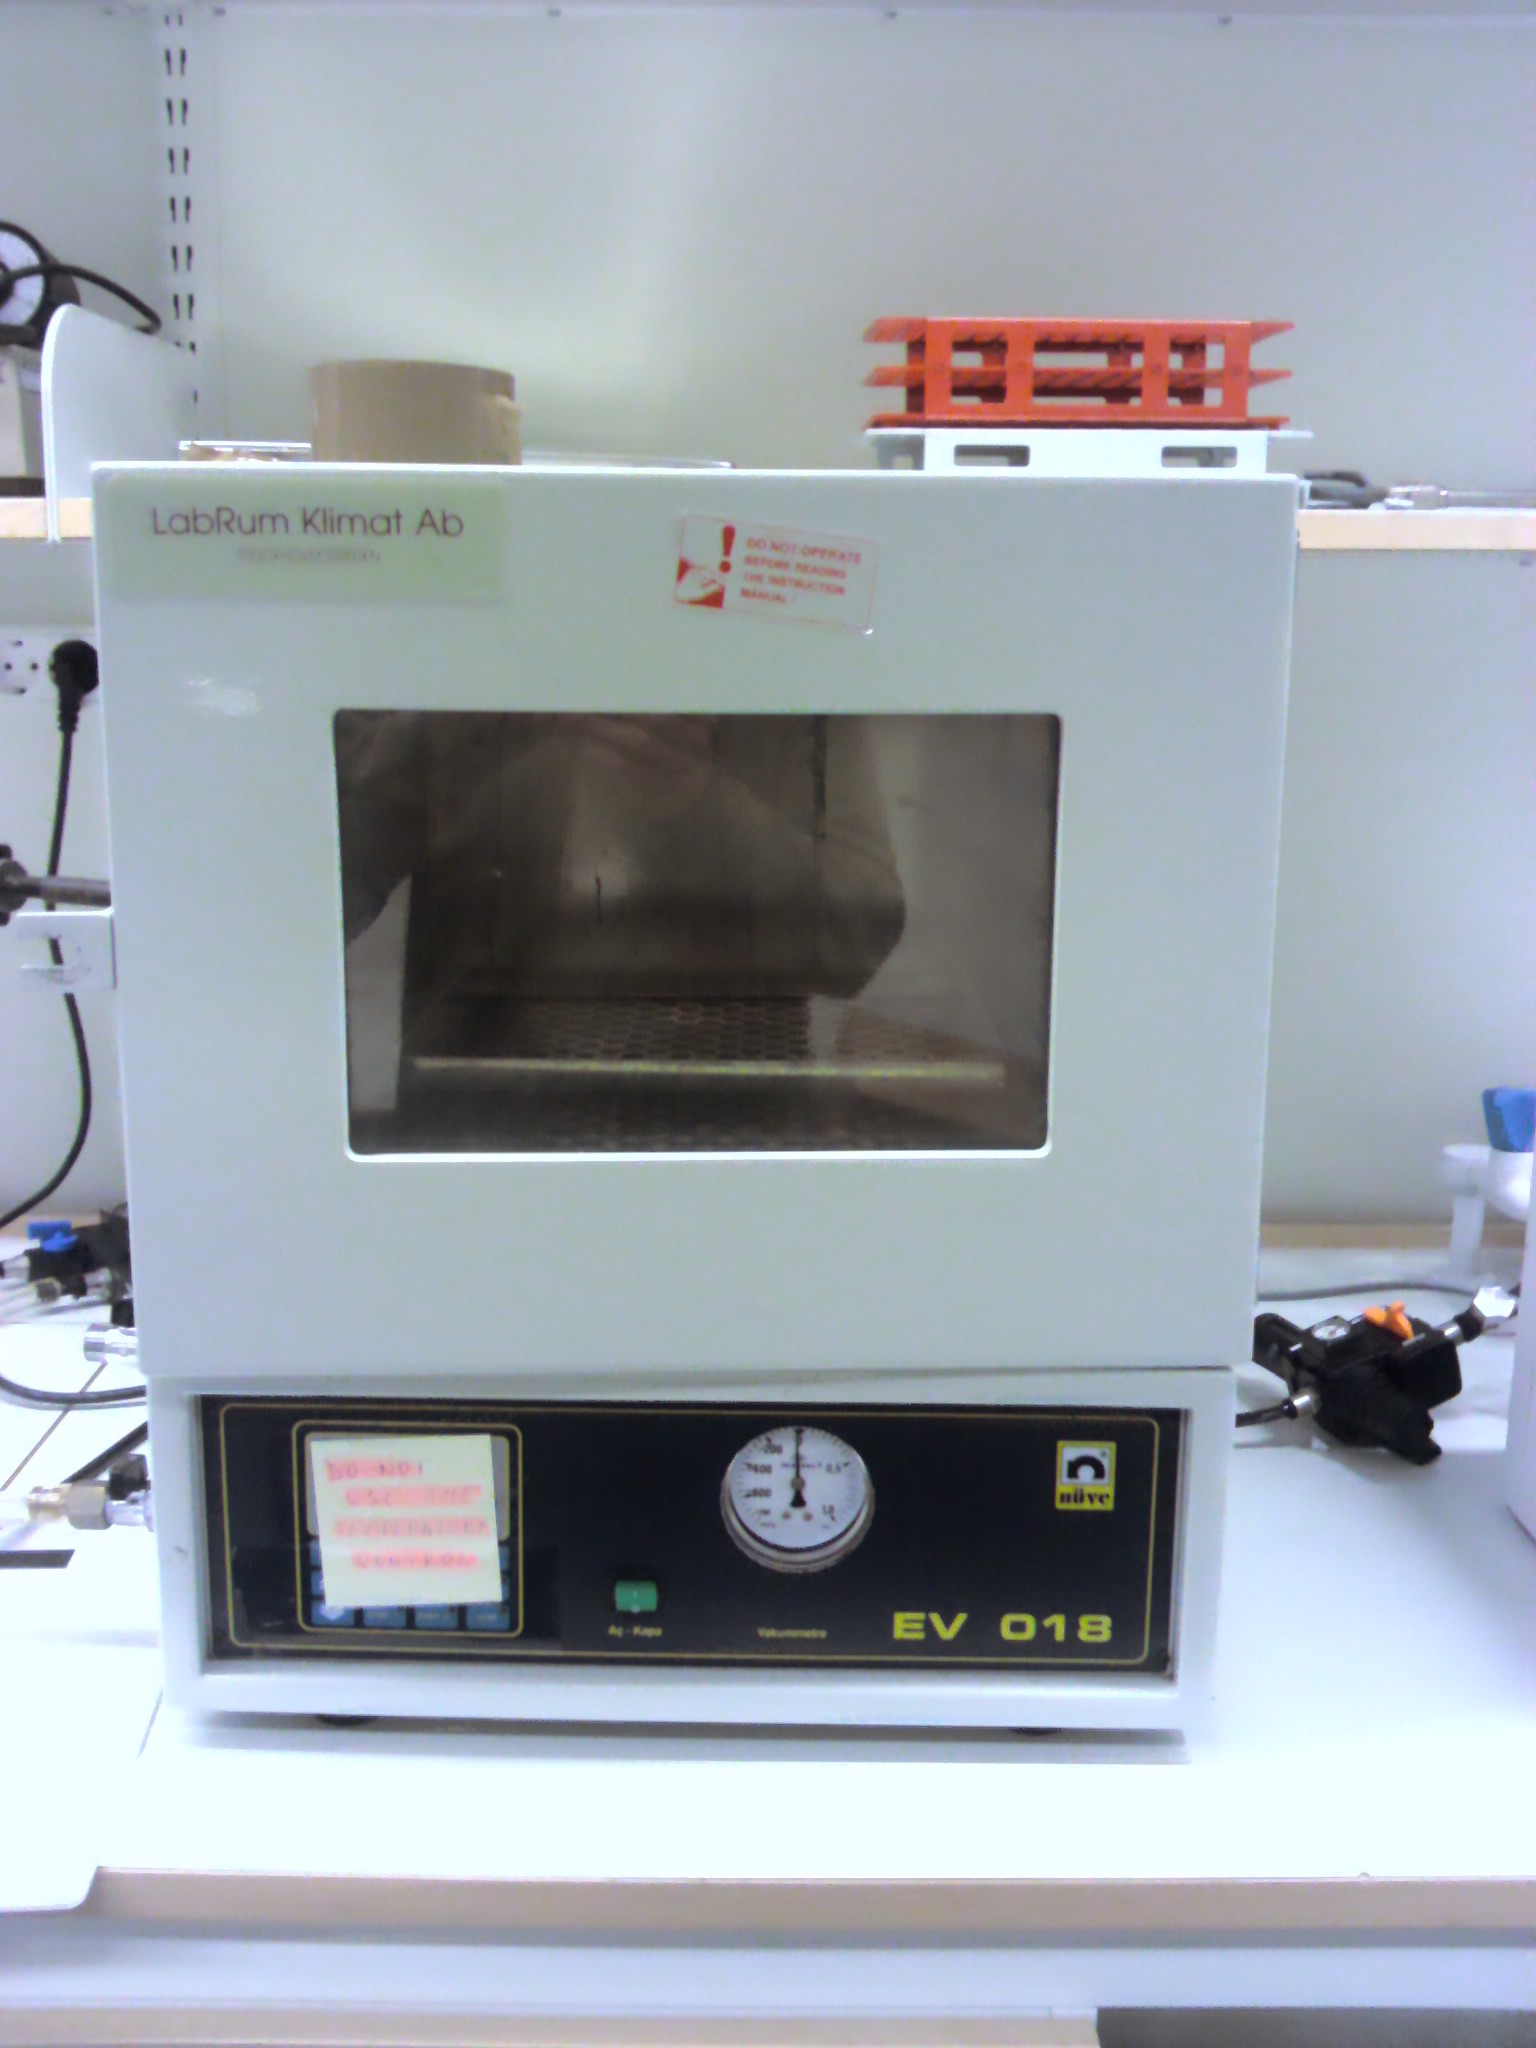 Picture of Vacuum oven